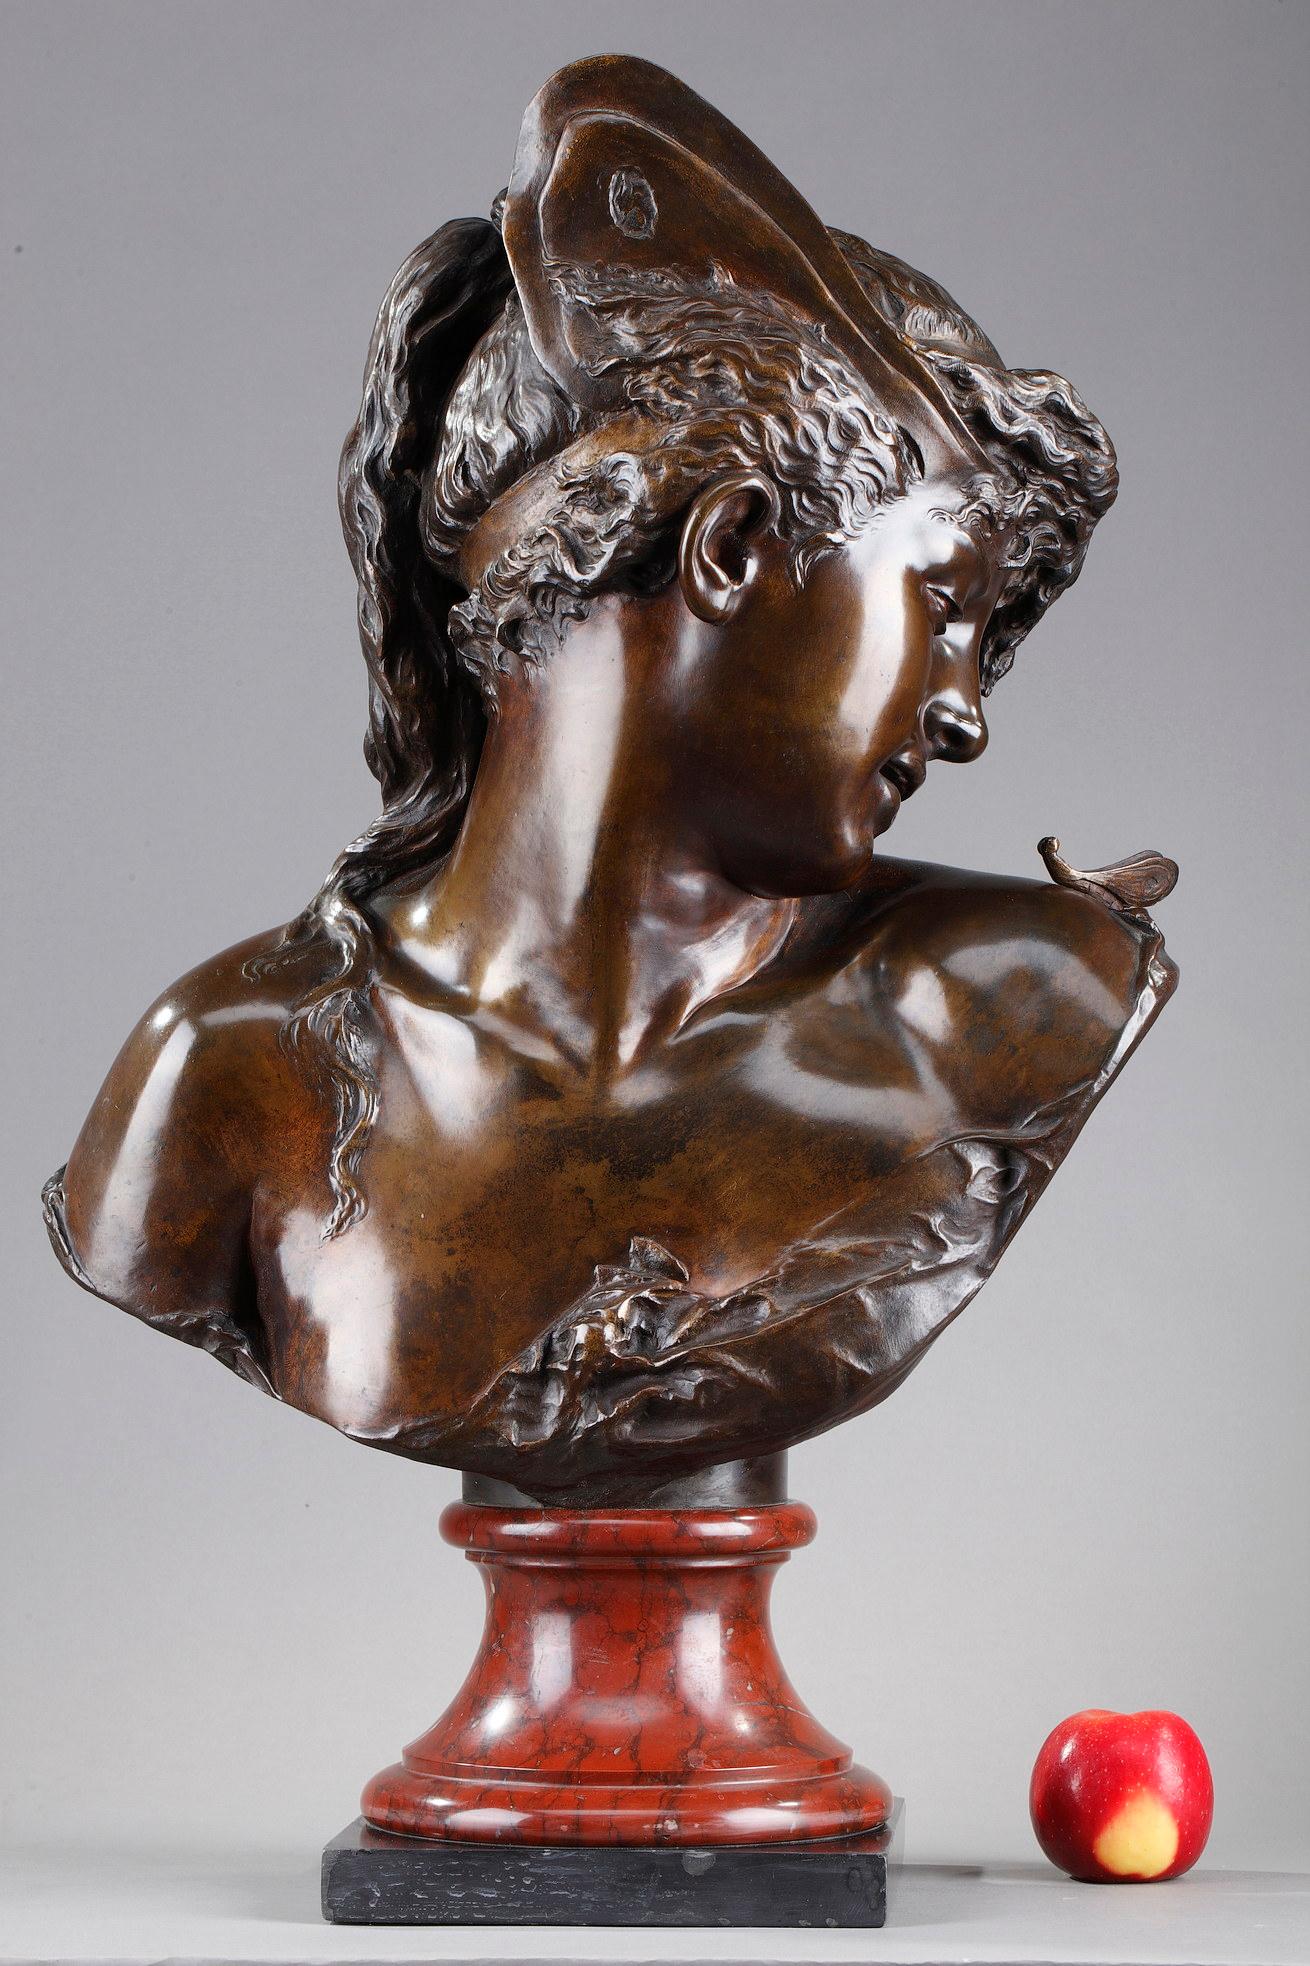 This is a bust of Psyche in patinated bronze by the founders Boyer and Rolland. It represents a young woman wearing butterfly wings in her hair with her head turned towards an insect placed on her shoulder. The little butterfly probably represents